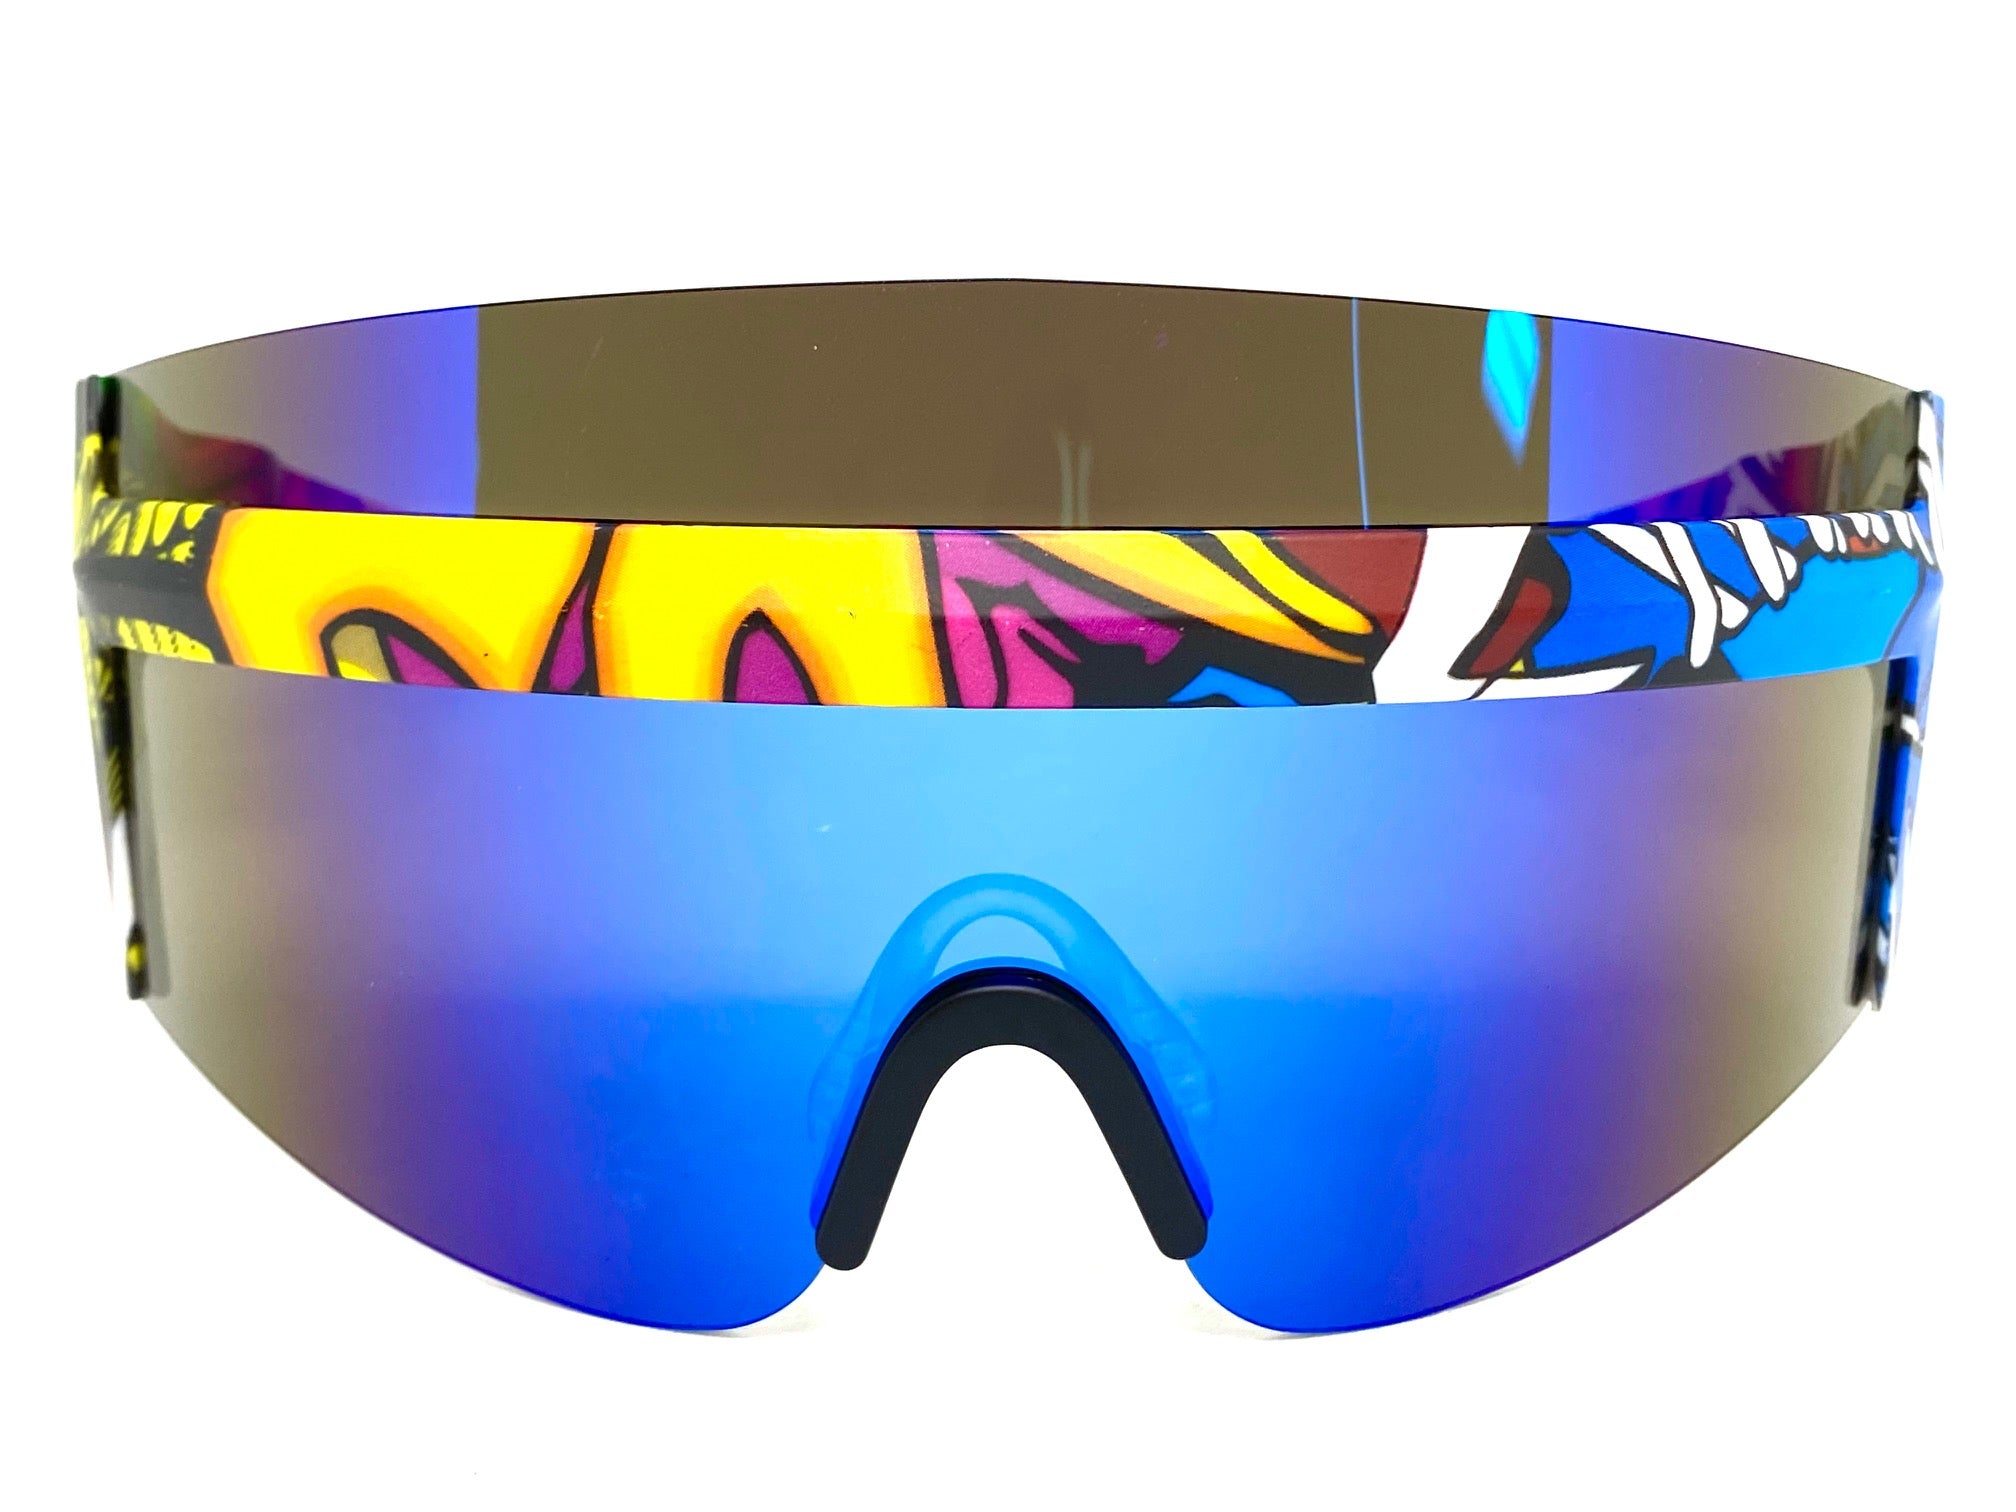 2021 Fashionable Oversized Full Face Shield Visor Sunglasses For Men And  Women Anti Spray, Protective, And Anti Fogg Goggles With Unisex Drop Design  From Looky_sky, $13.32 | DHgate.Com